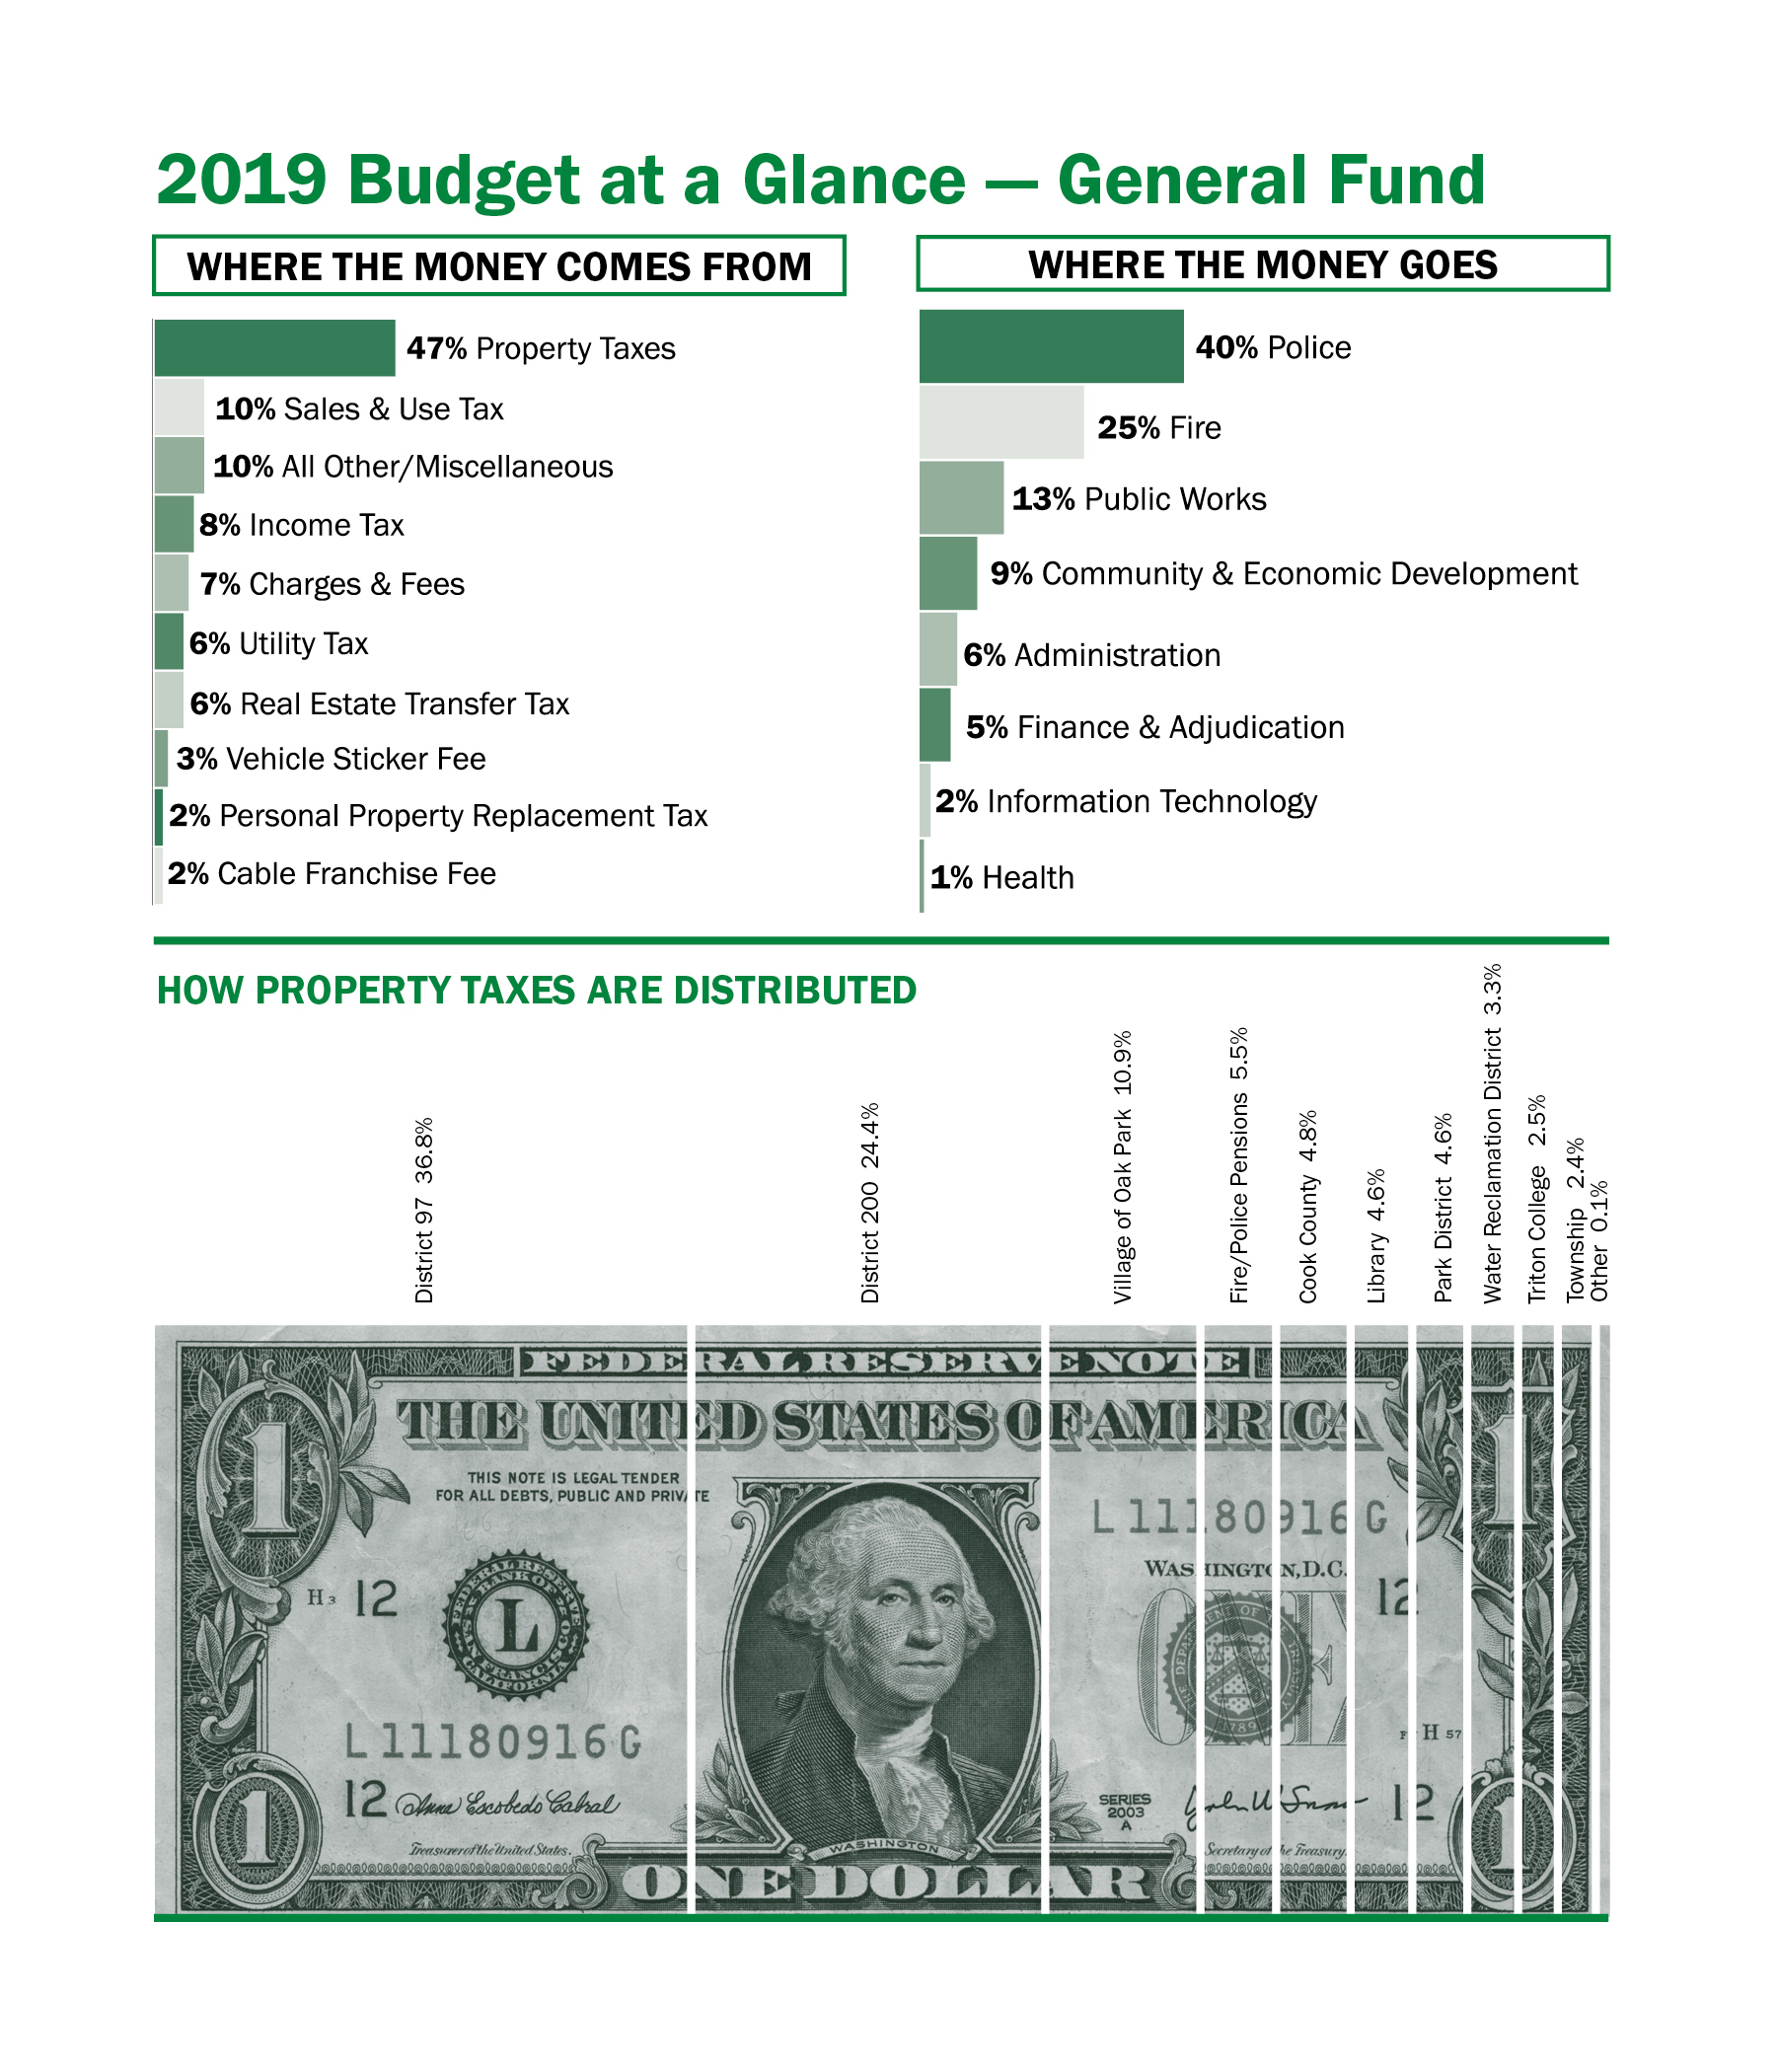 Graphic of 2019 budget indicating revenue sources and expenditures, as well as how property taxes are distributed among taxing bodies.